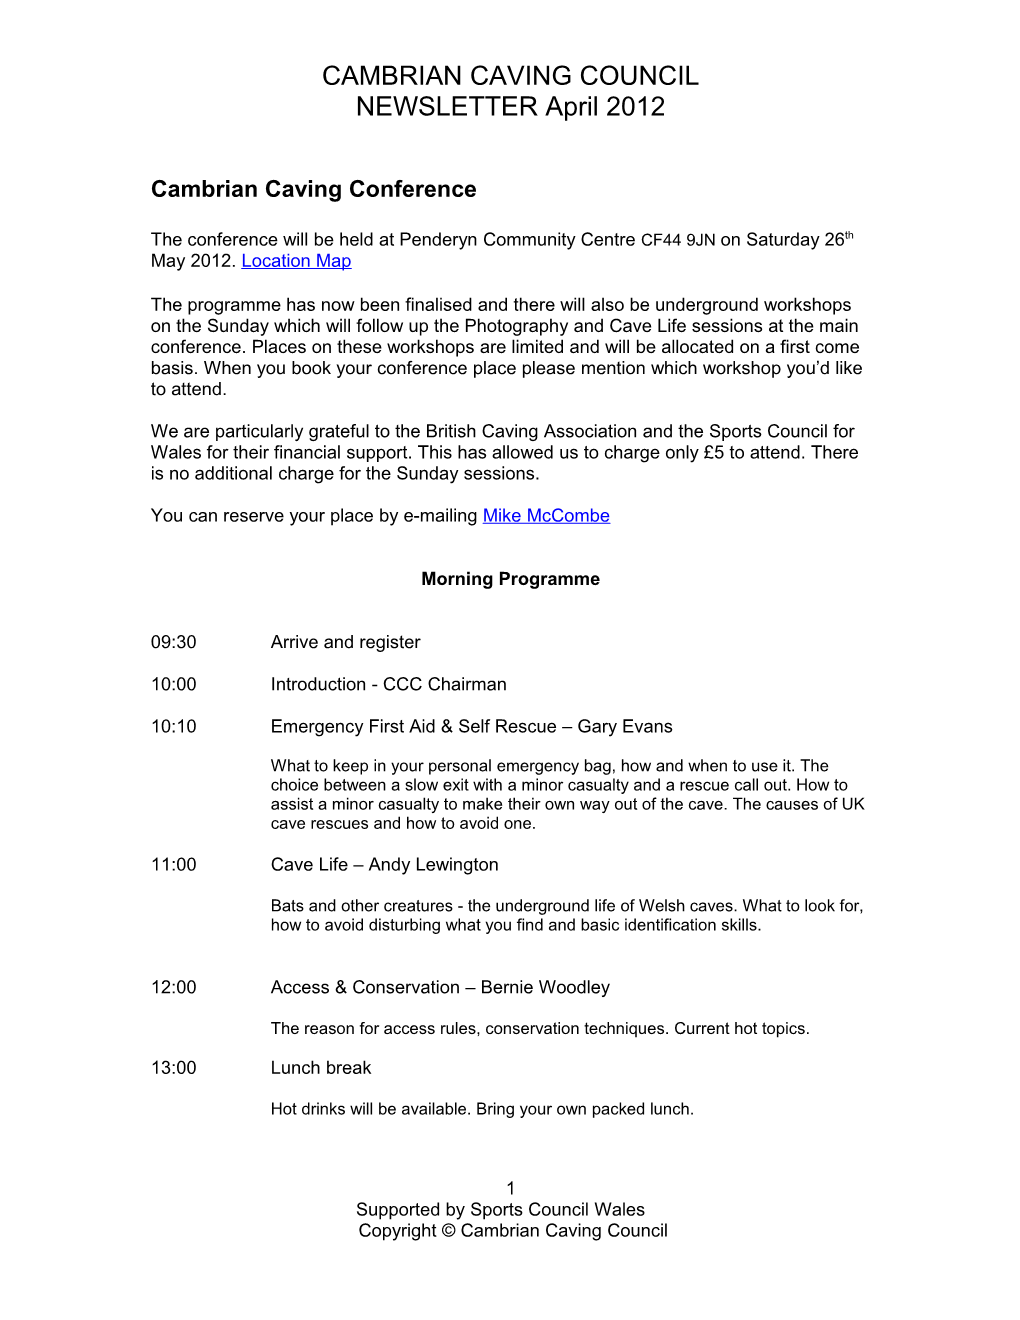 Cambrian Caving Conference